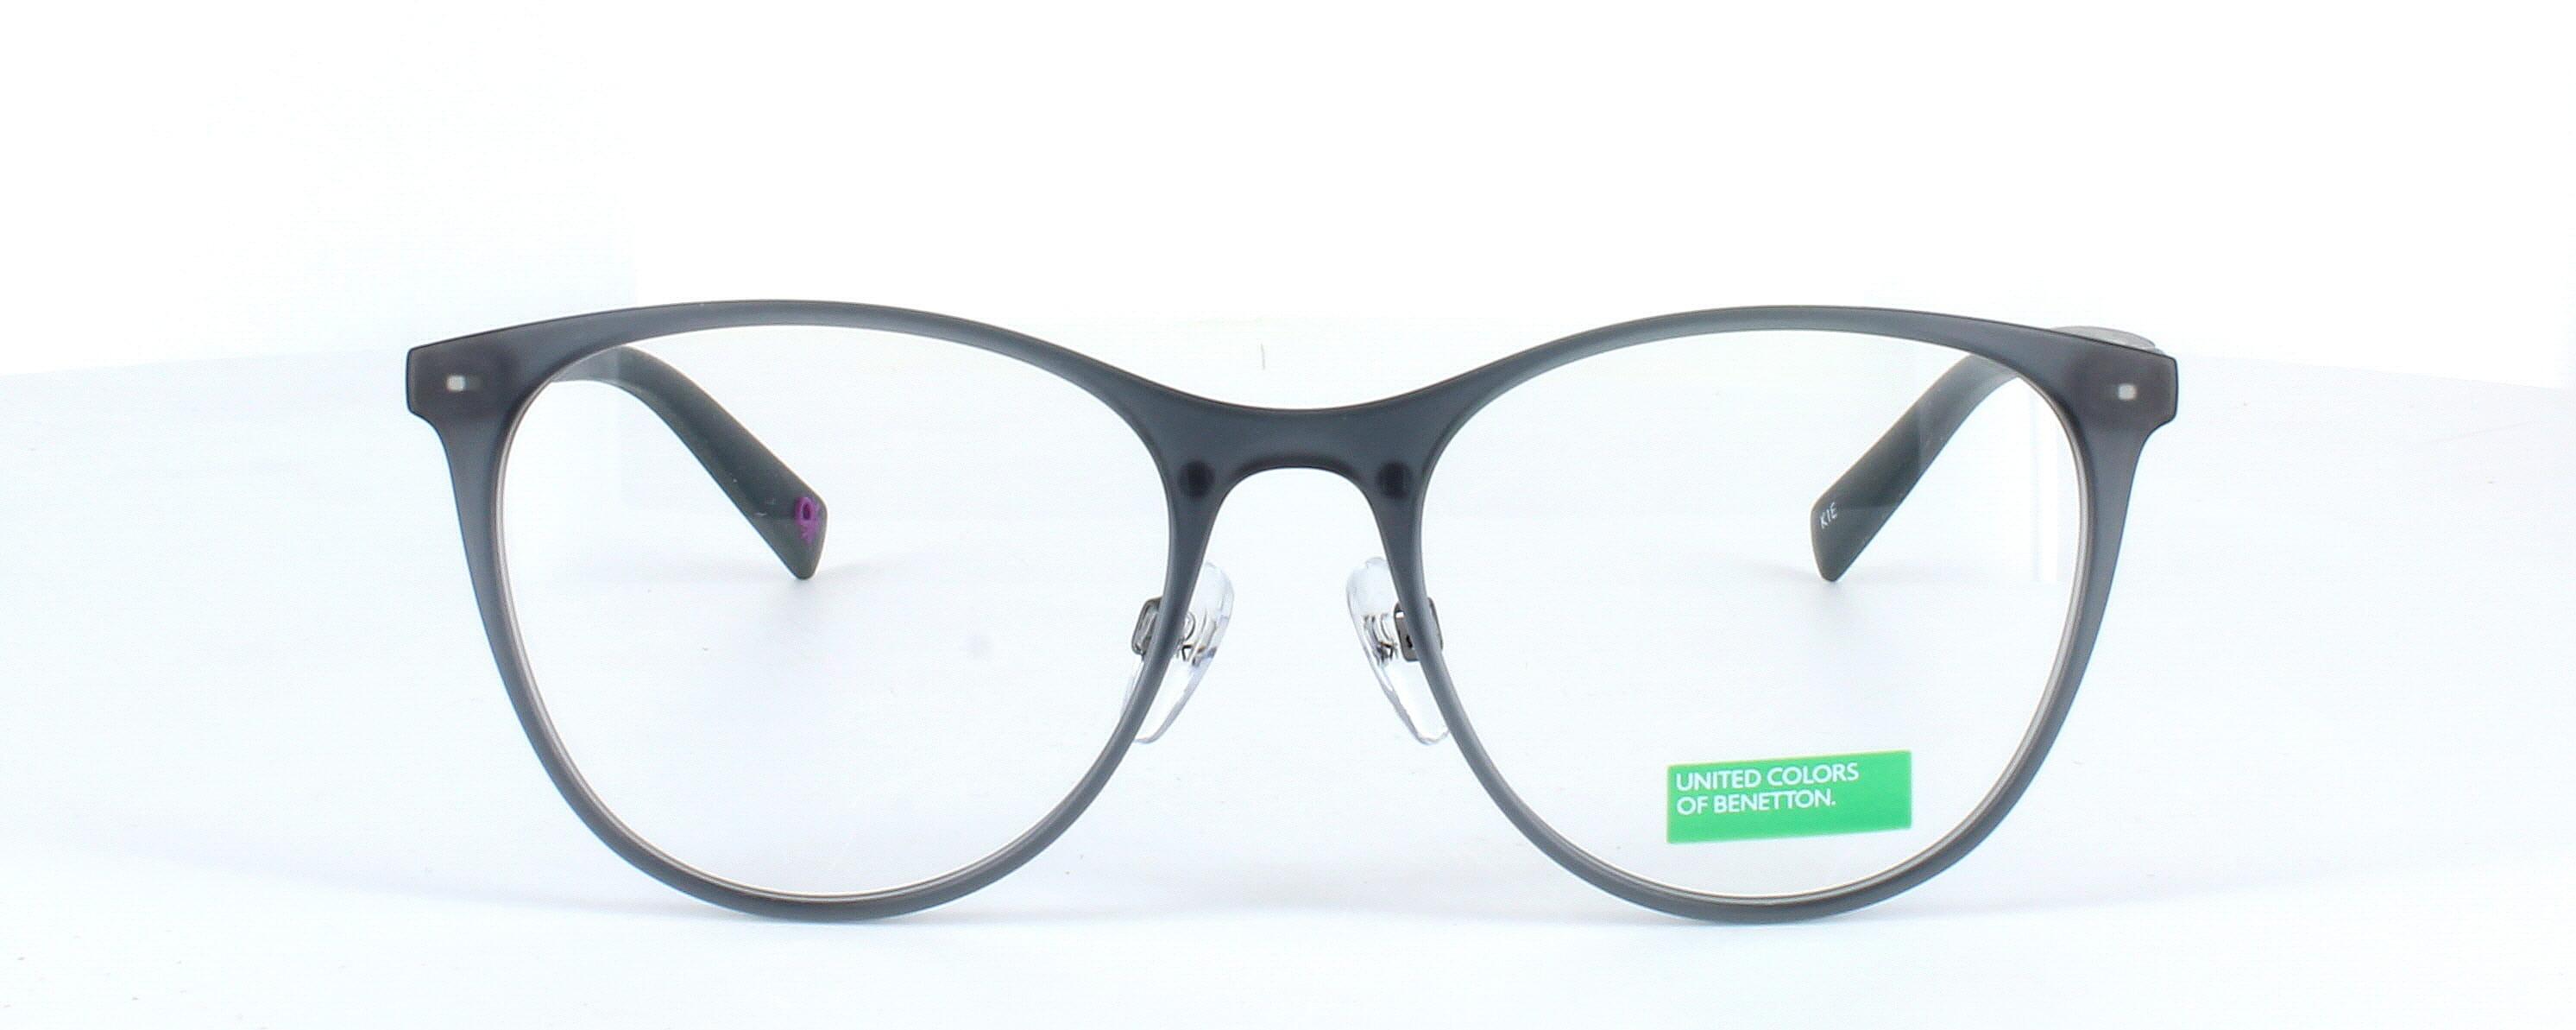 Benetton BEO1013 112 - Women's matt crystal grey round shaped TR90 lightweight plastic glasses frame with grey arms - image view 2